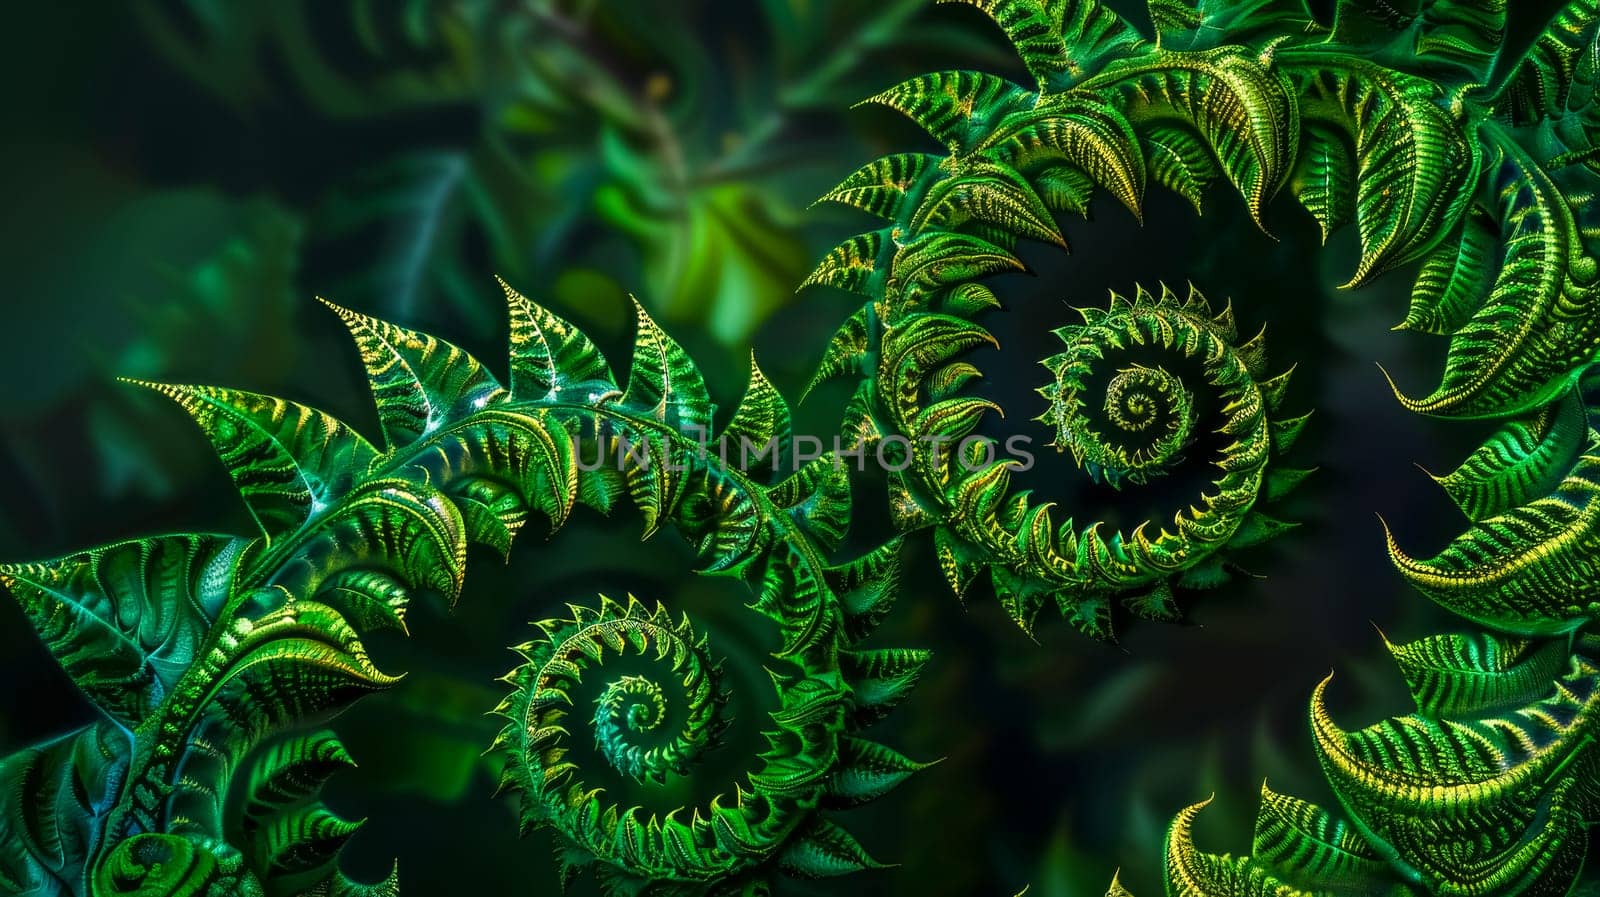 Abstract fractal artwork resembling natural ferns by Edophoto